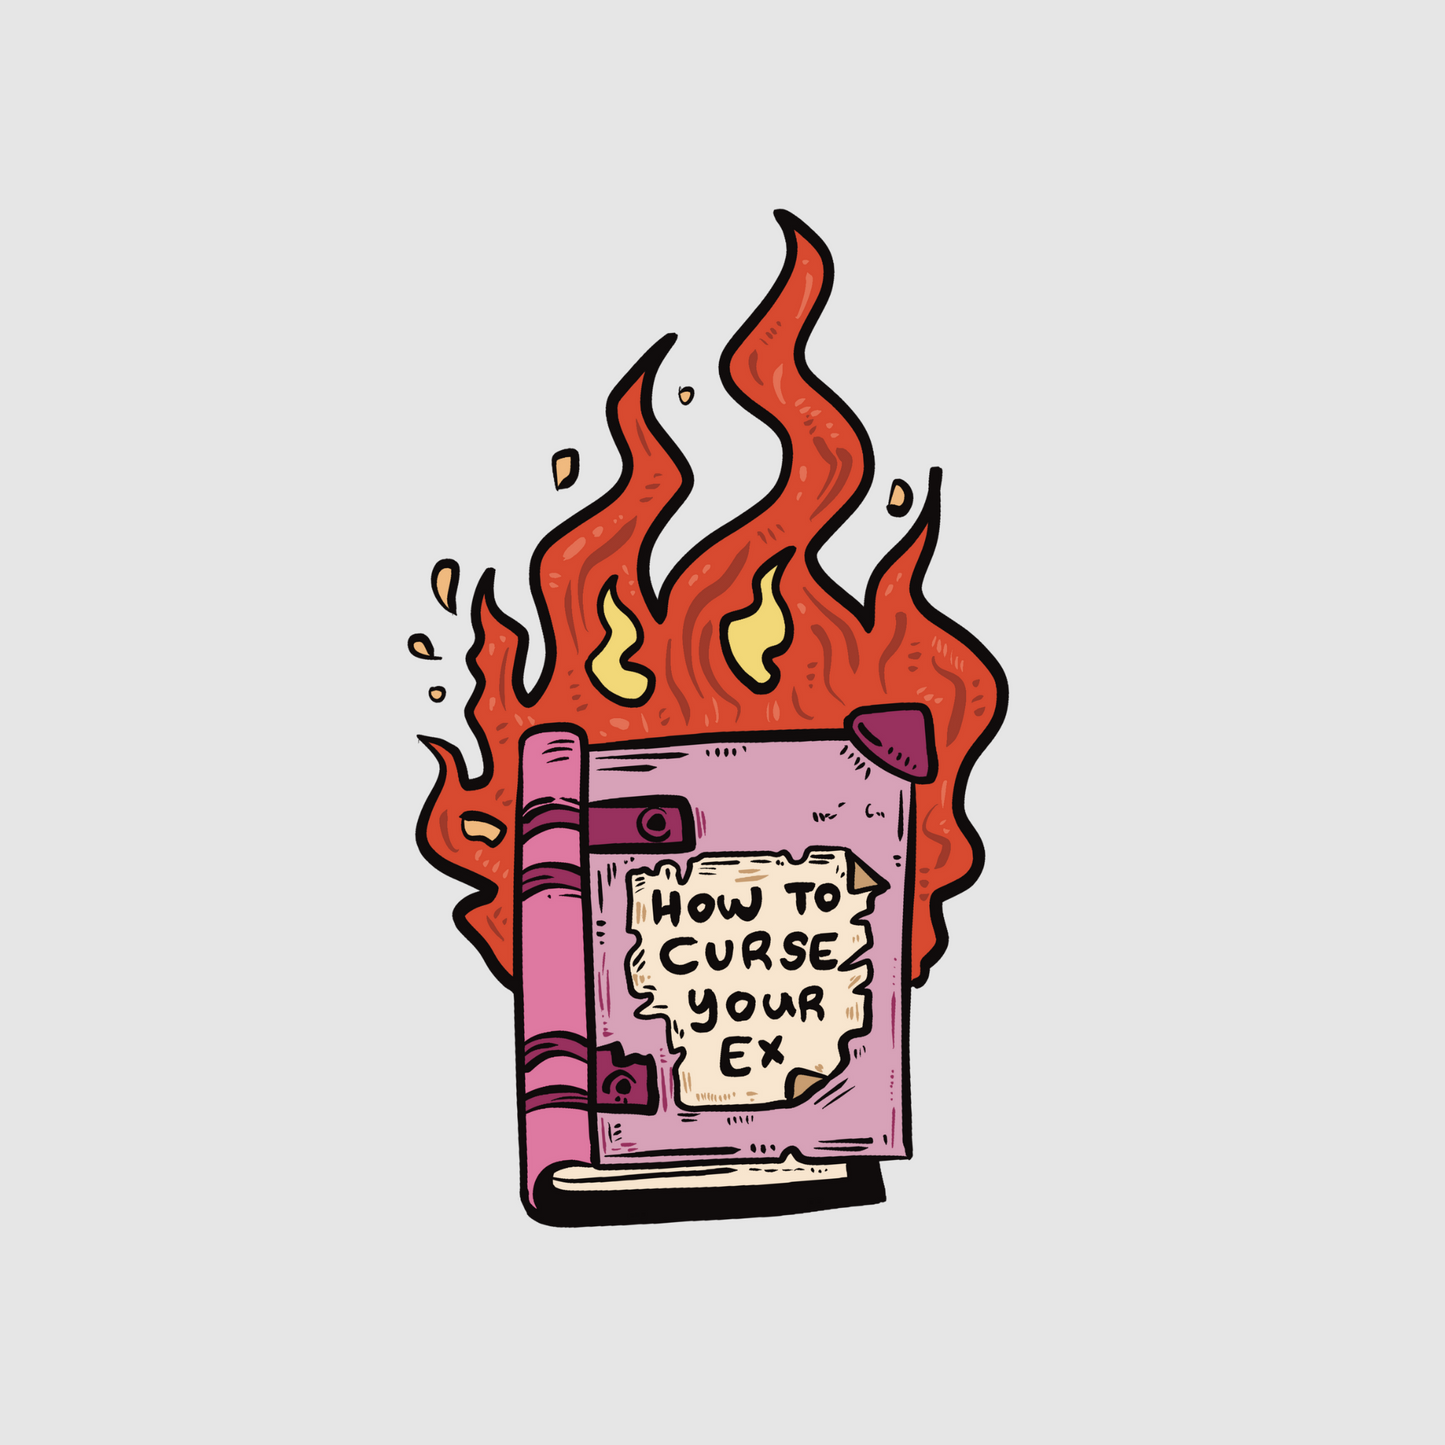 Magic book - how to curse your ex sticker